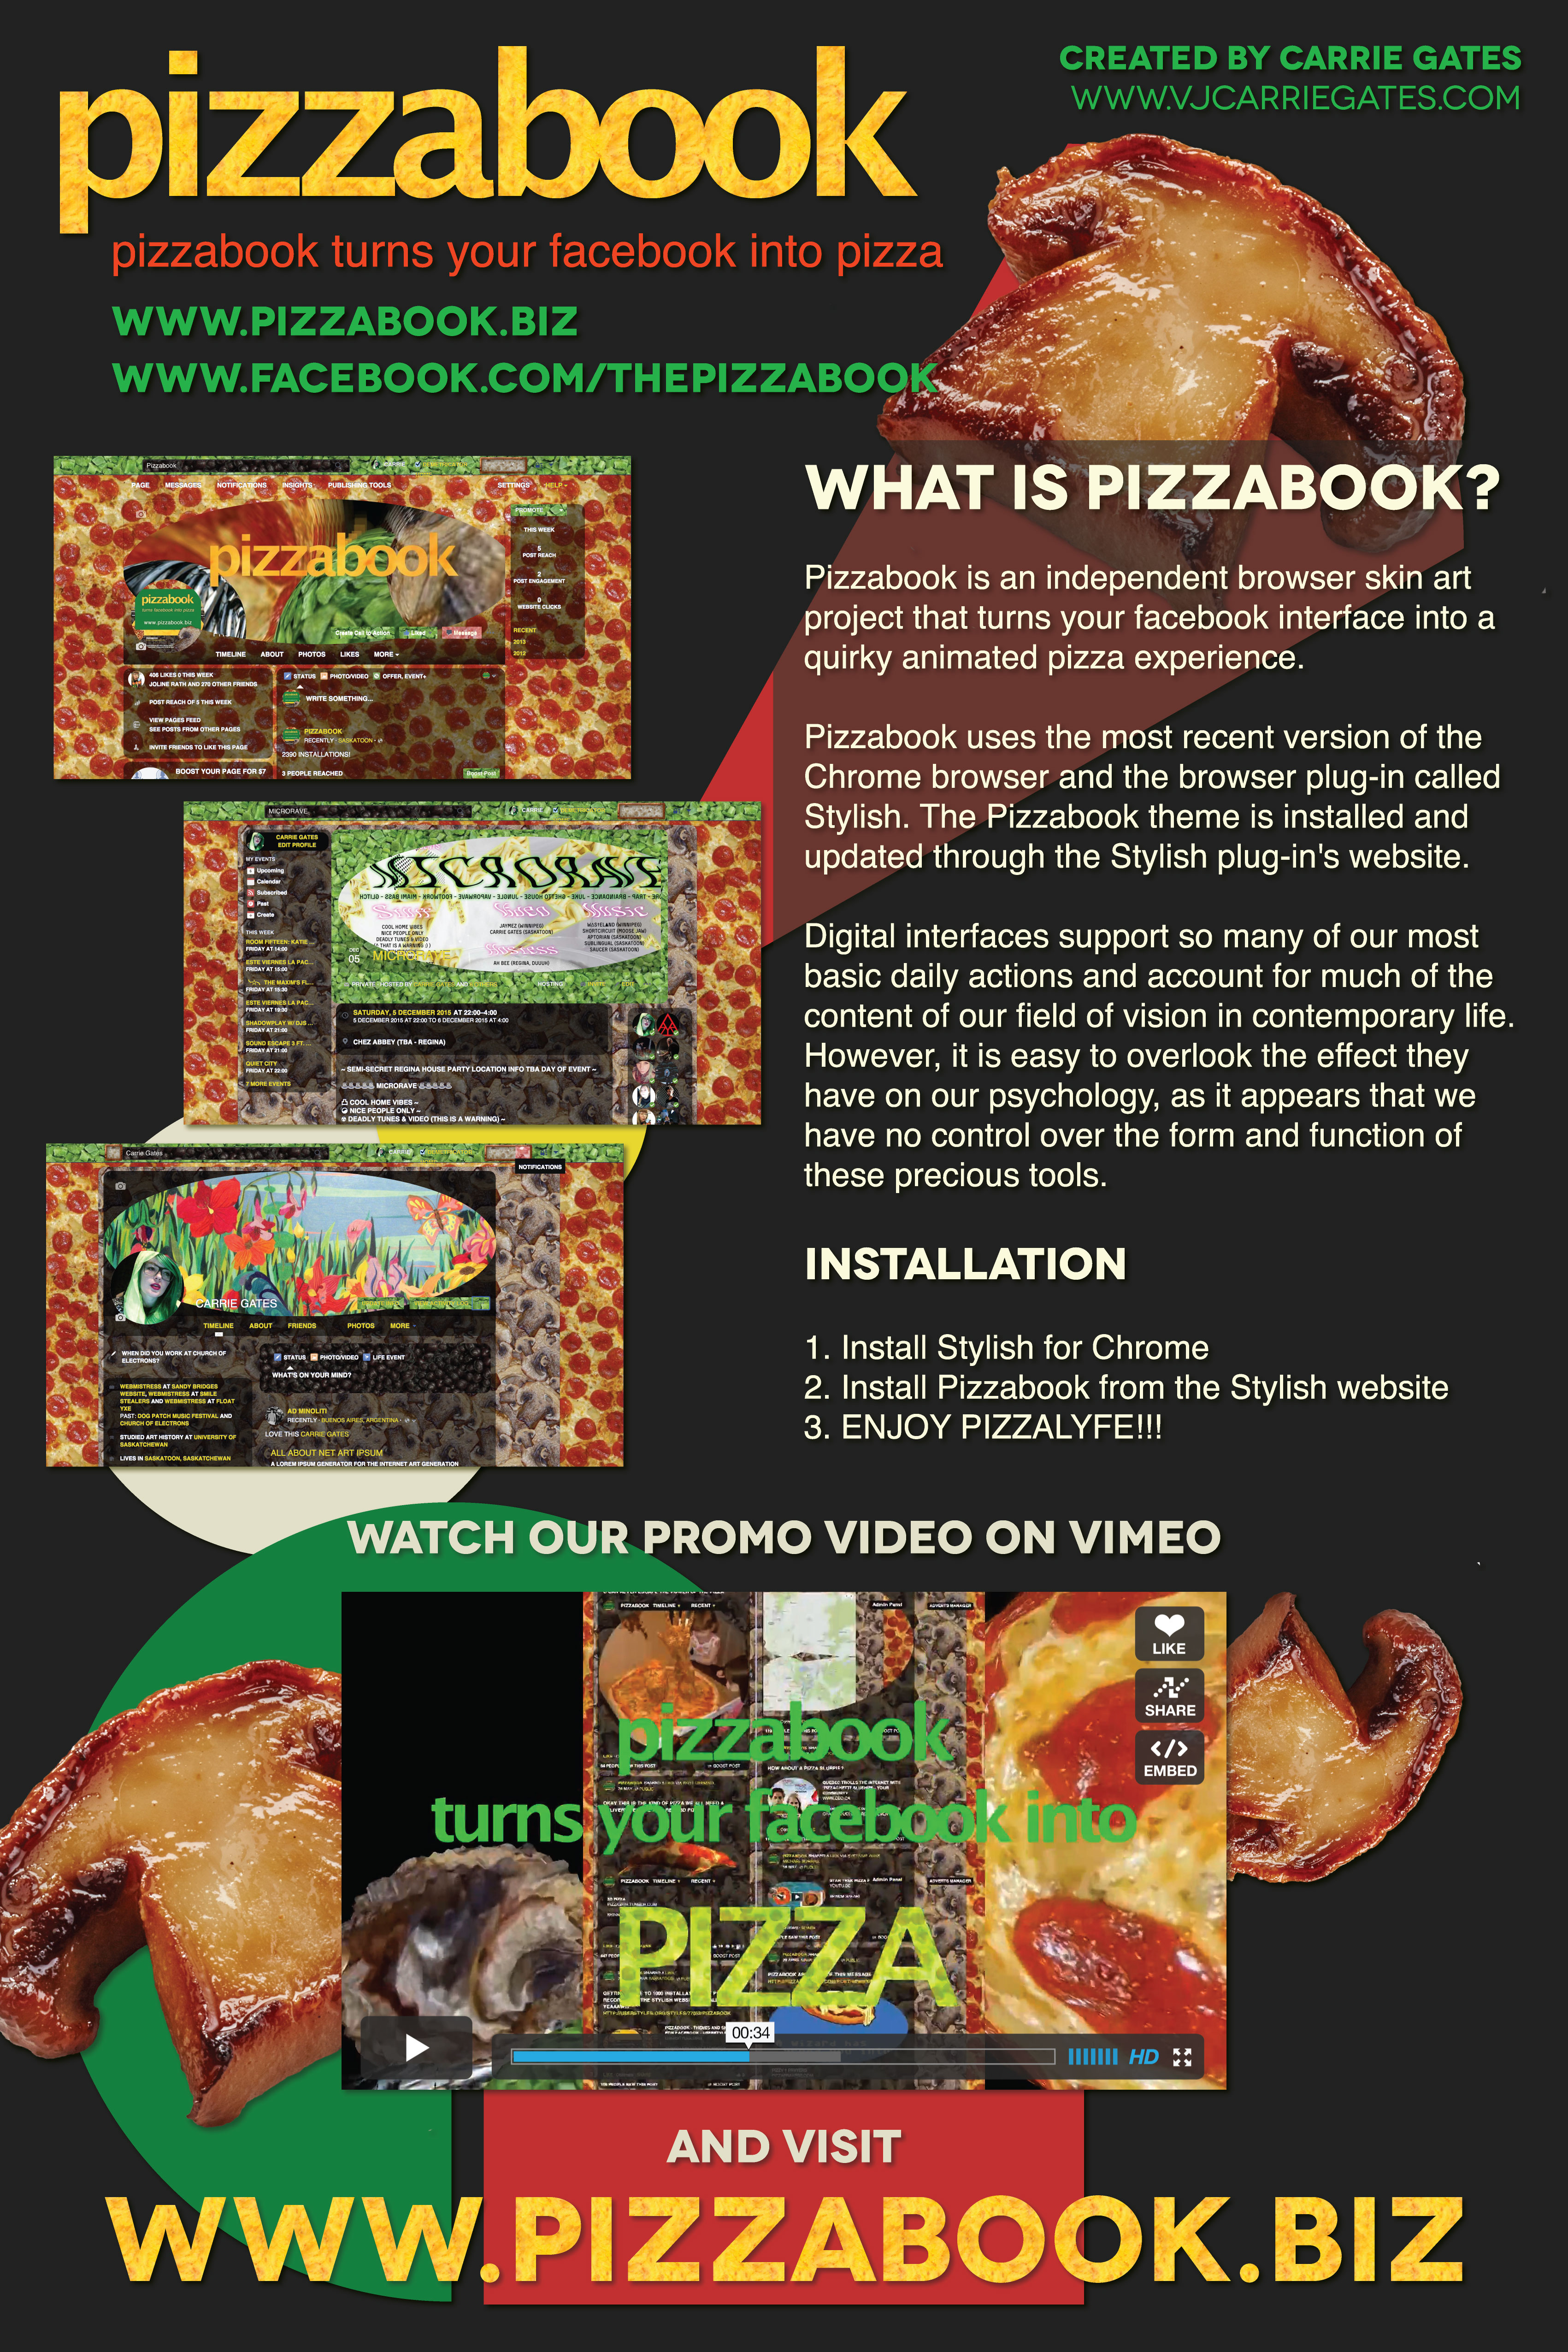 Pizzabook Poster - January 2016